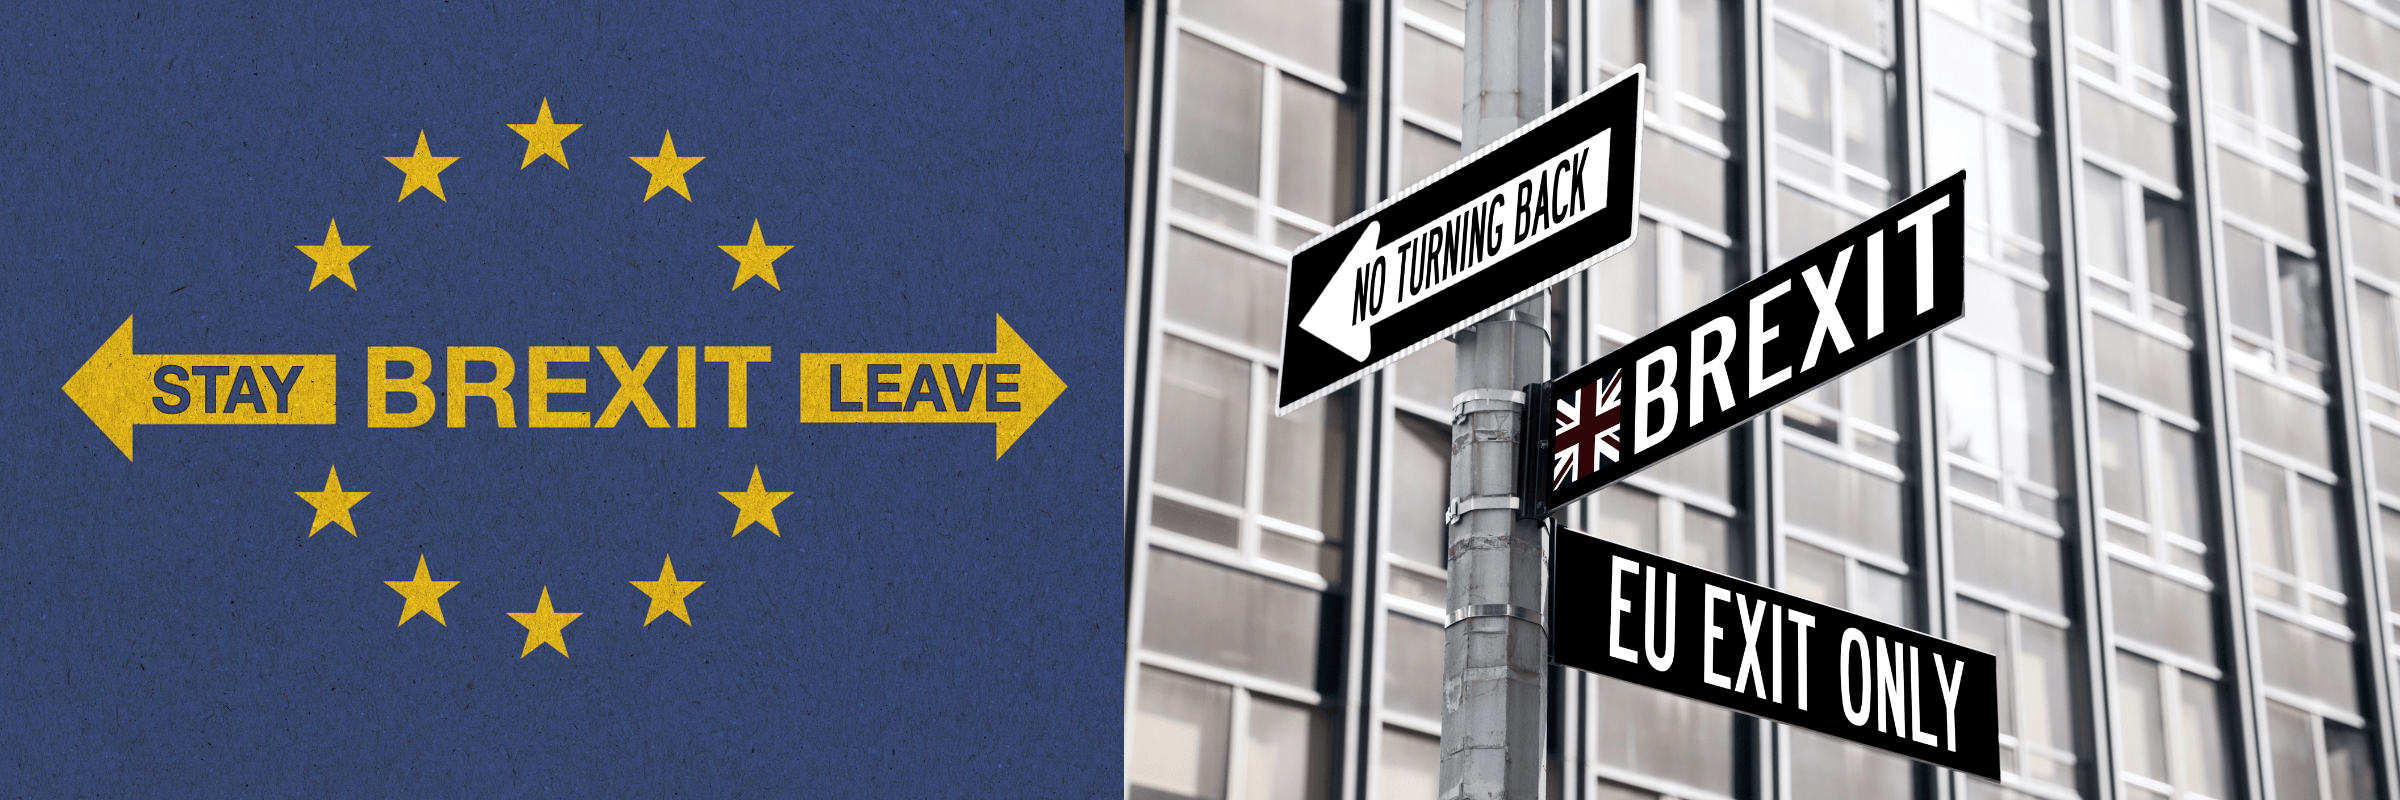 stay or leave Brexit campaign, no turning back EU Brexit signposts